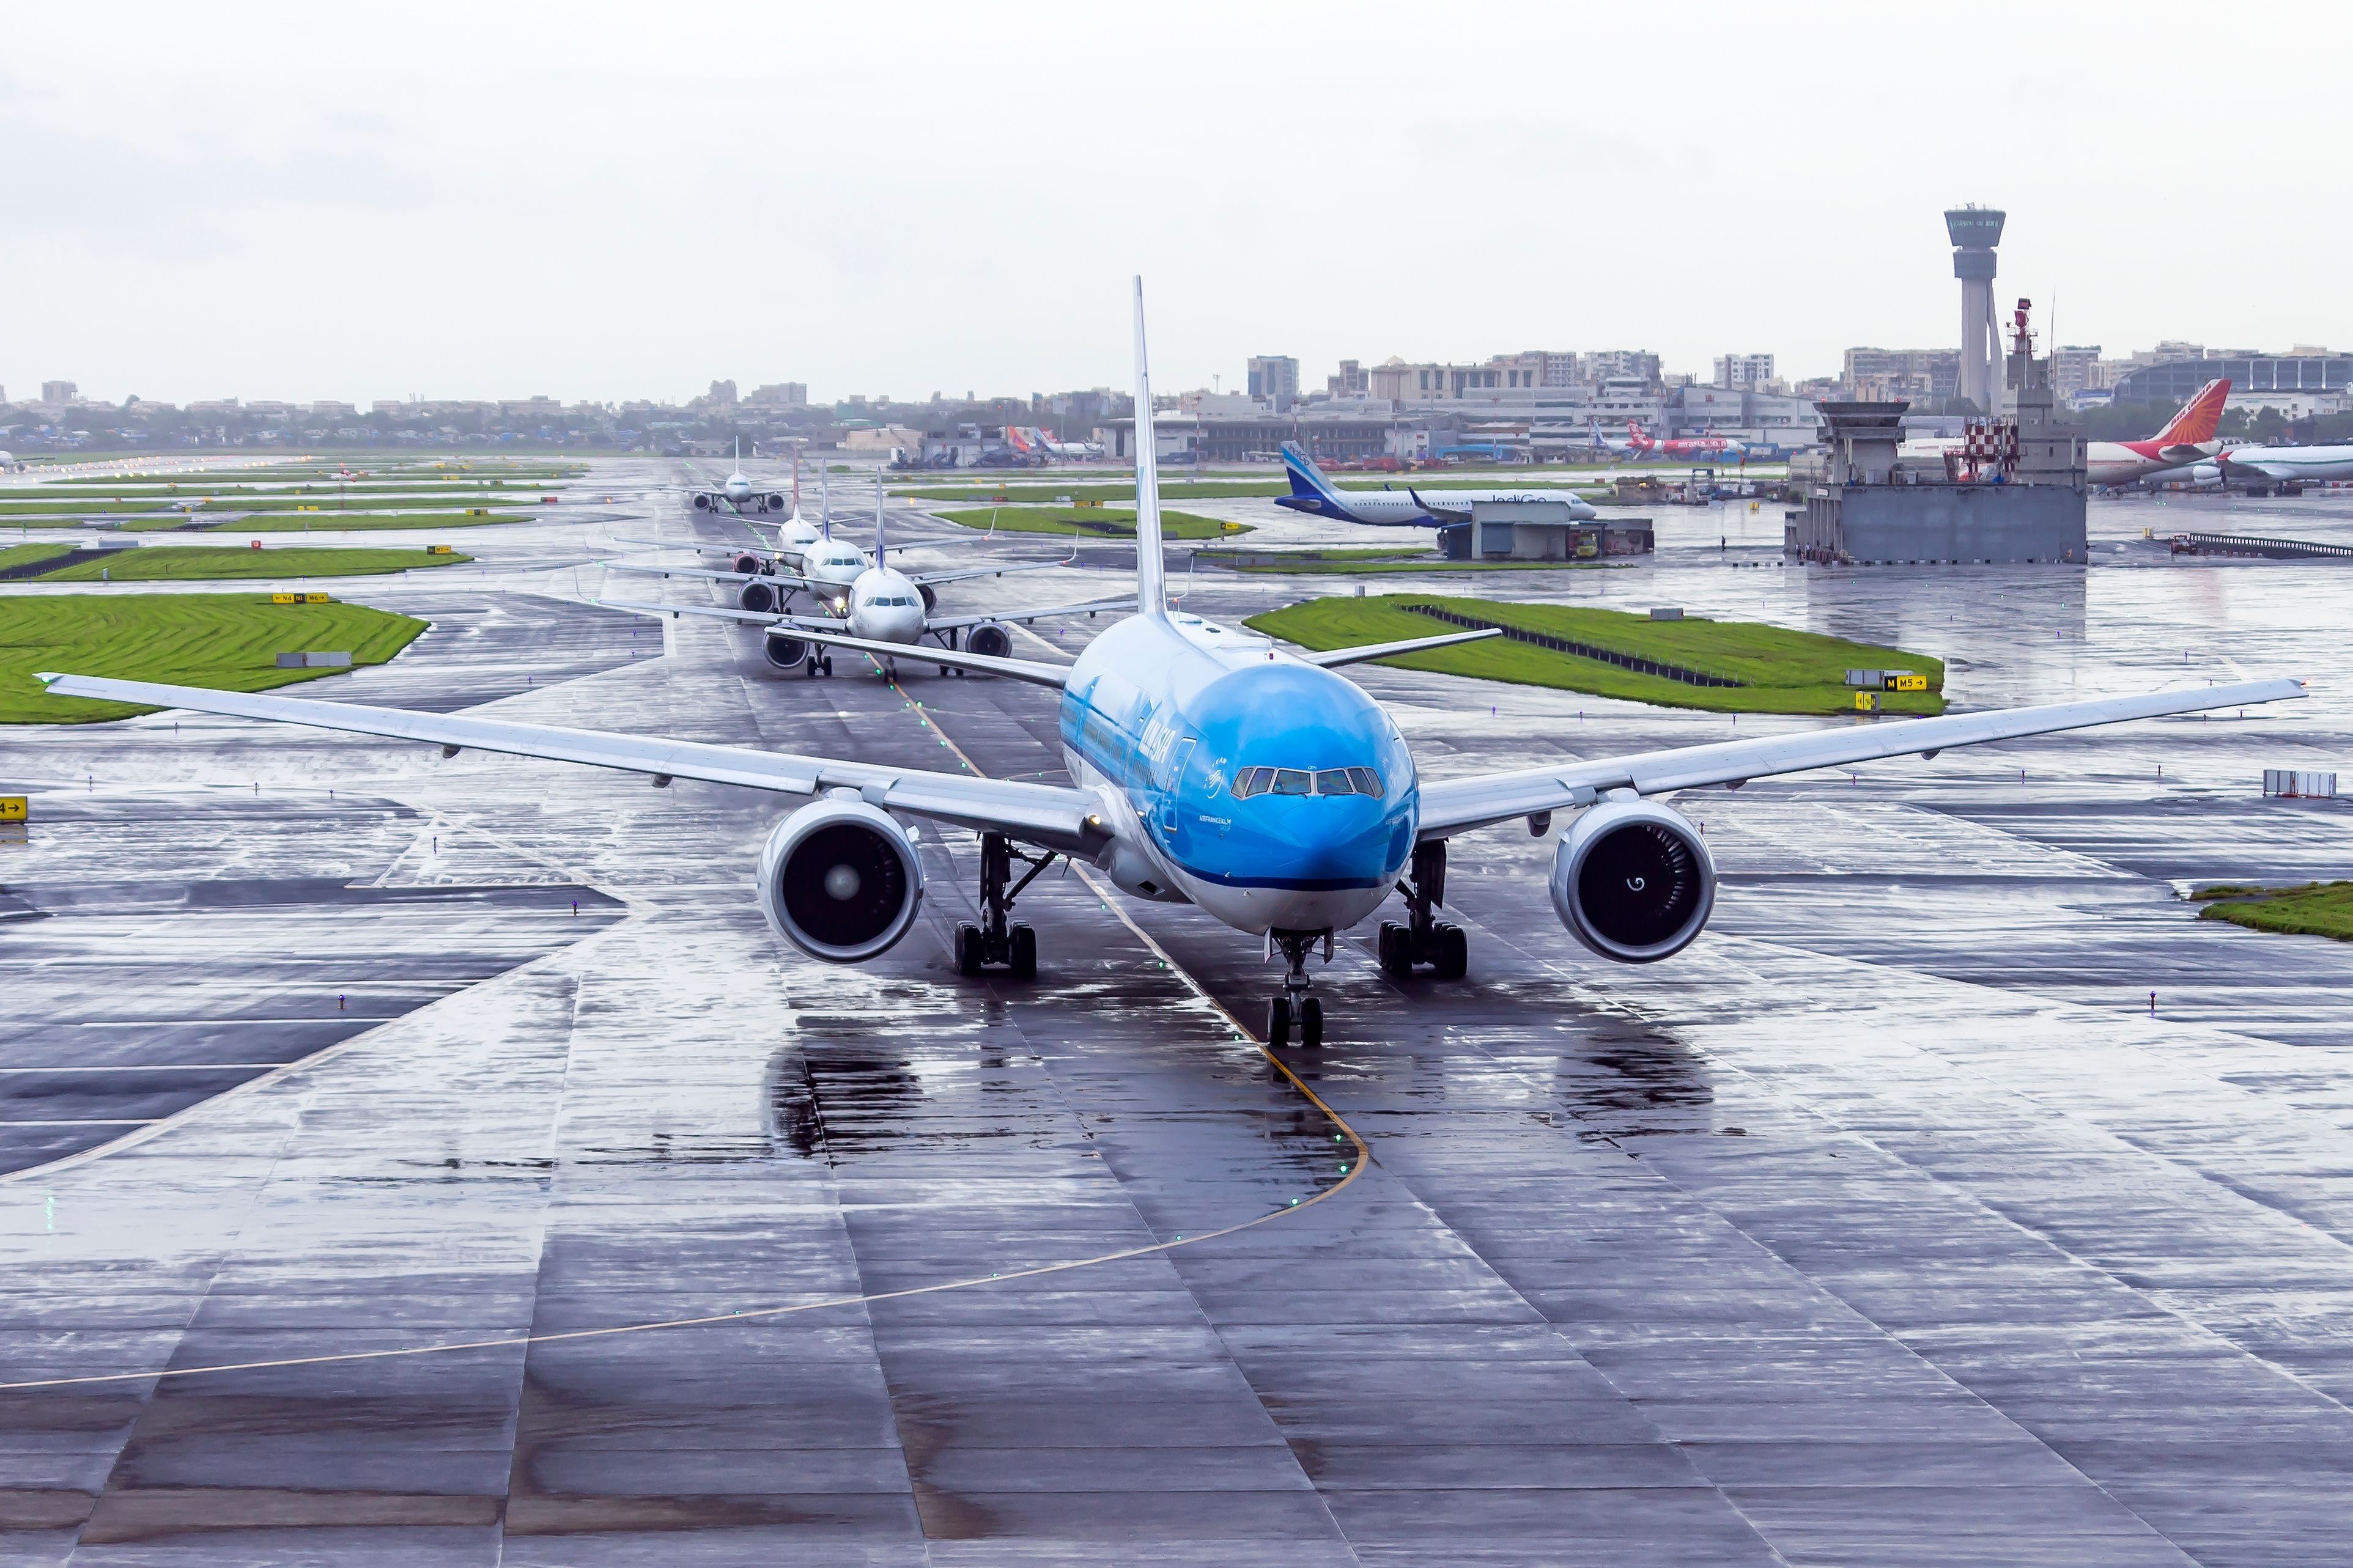 A KLM 777 lined up for takeoff at Mumbai Airport.